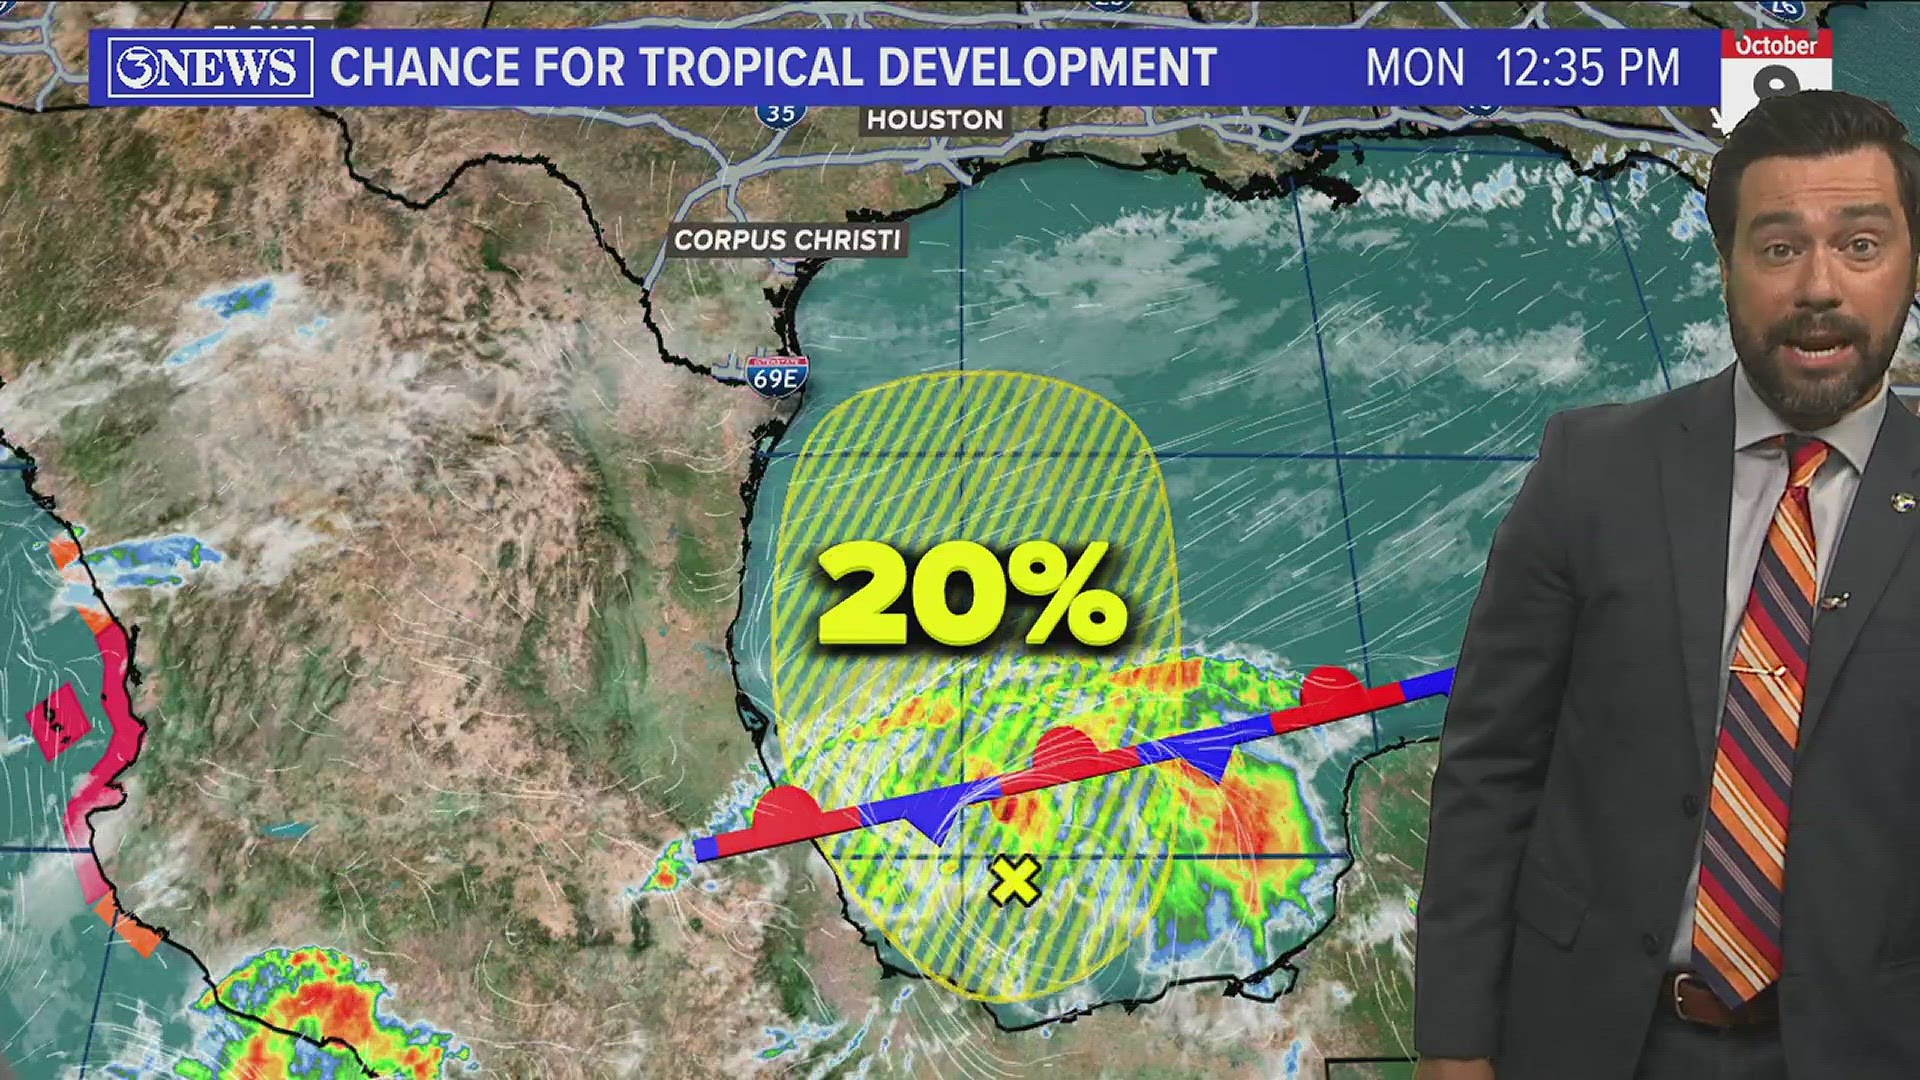 South Texas is in line to cash in on some rainfall, courtesy tropical systems in the Pacific. The NHC has issued a 20% chance of development in the Gulf.